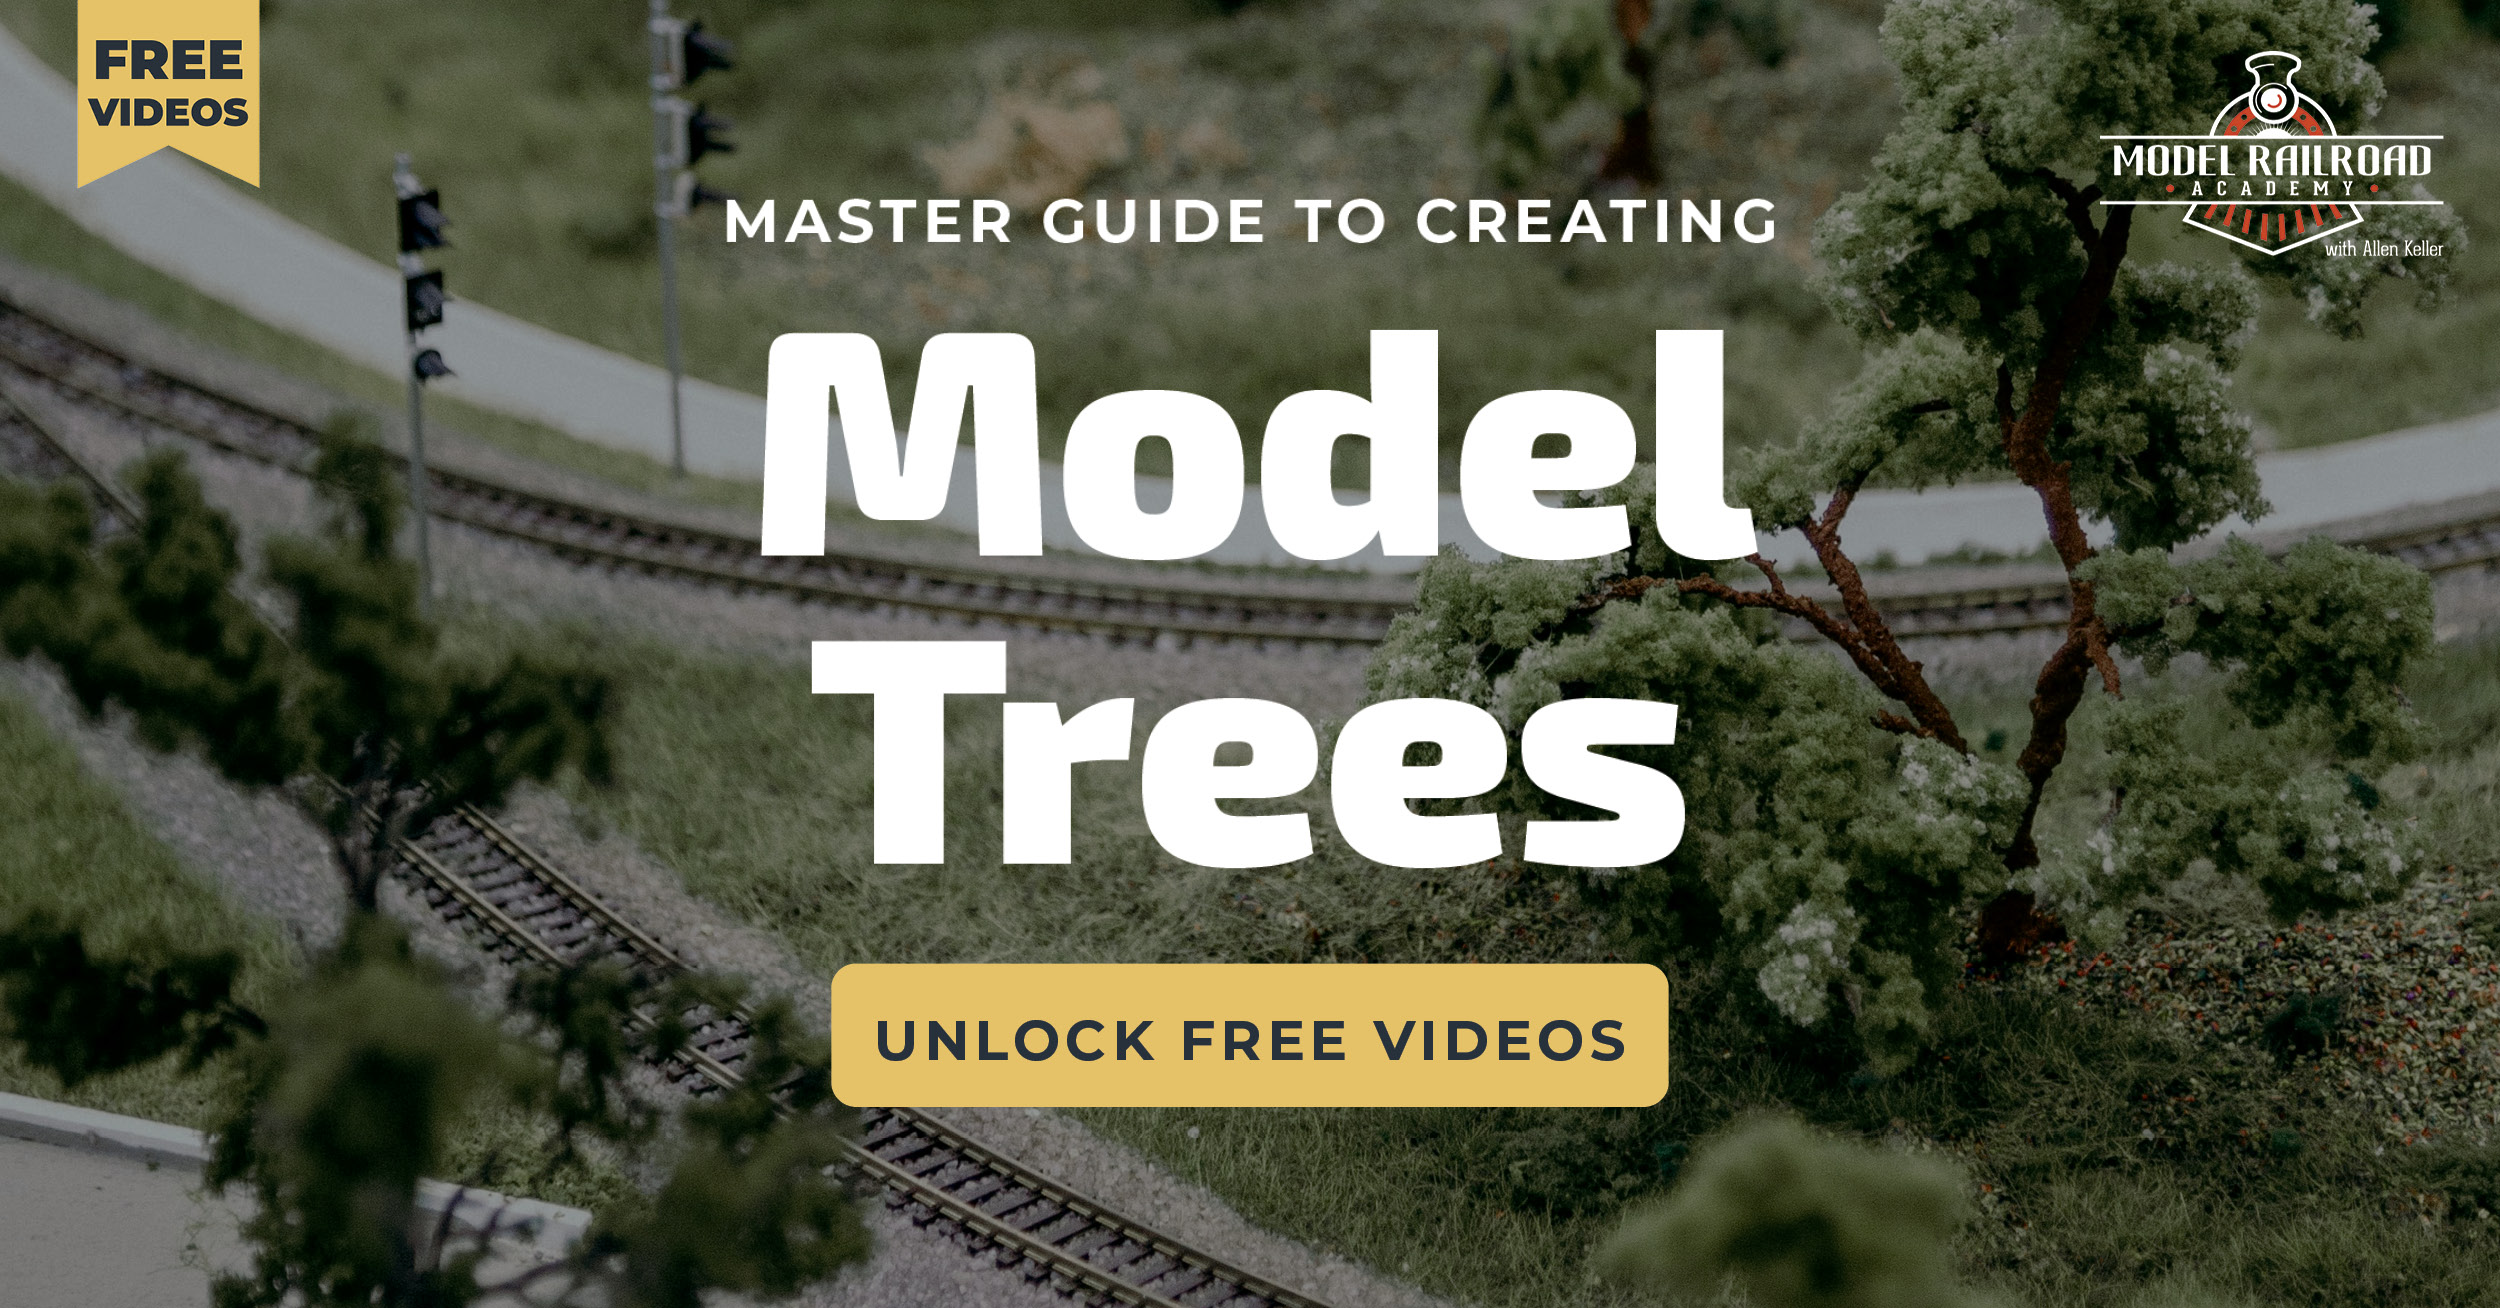 Master Guide to Creating Model Treesarticle featured image thumbnail.